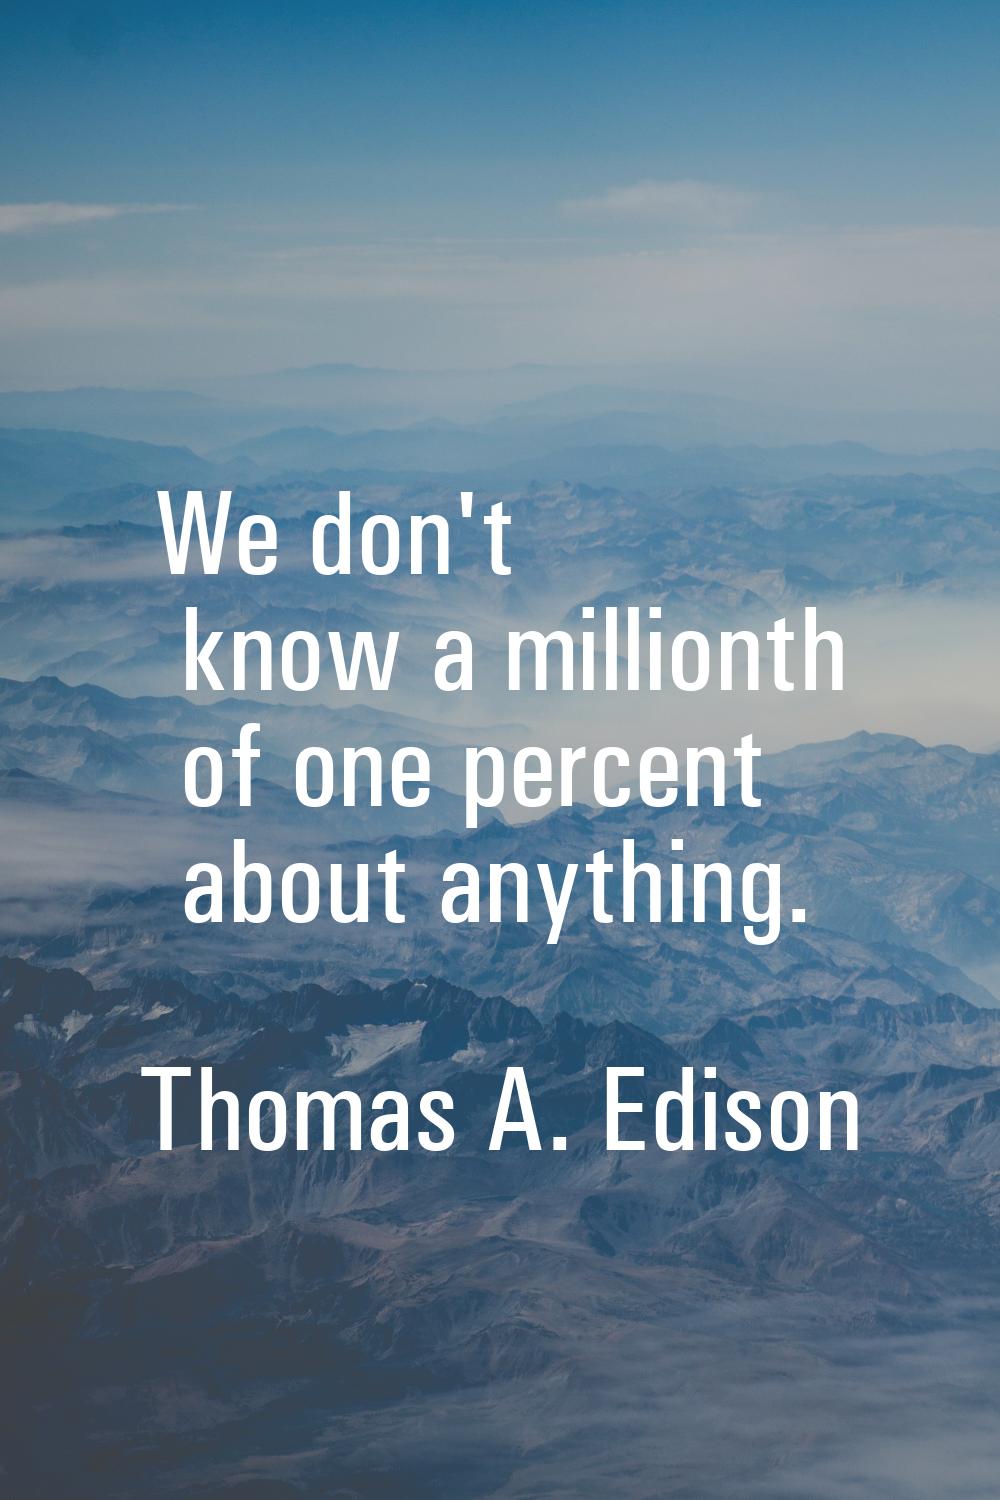 We don't know a millionth of one percent about anything.